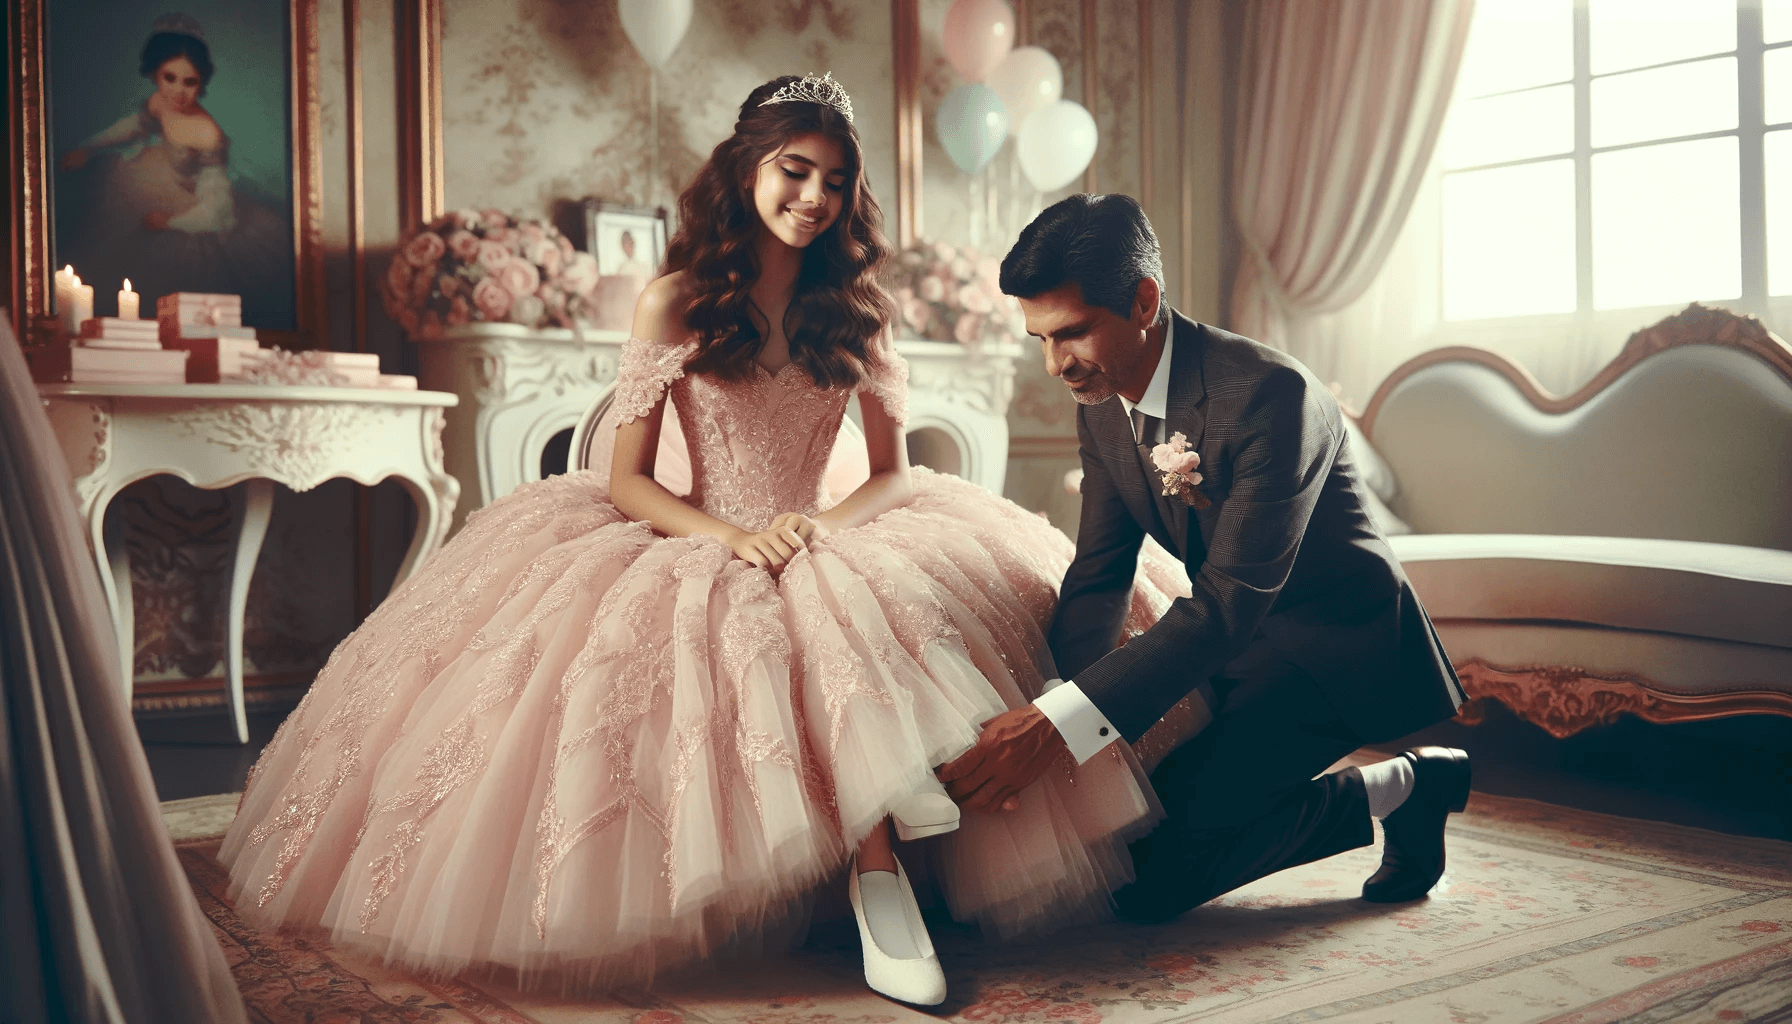 A Quinceanera celebrant wearing a ball gown with a man in a tuxedo